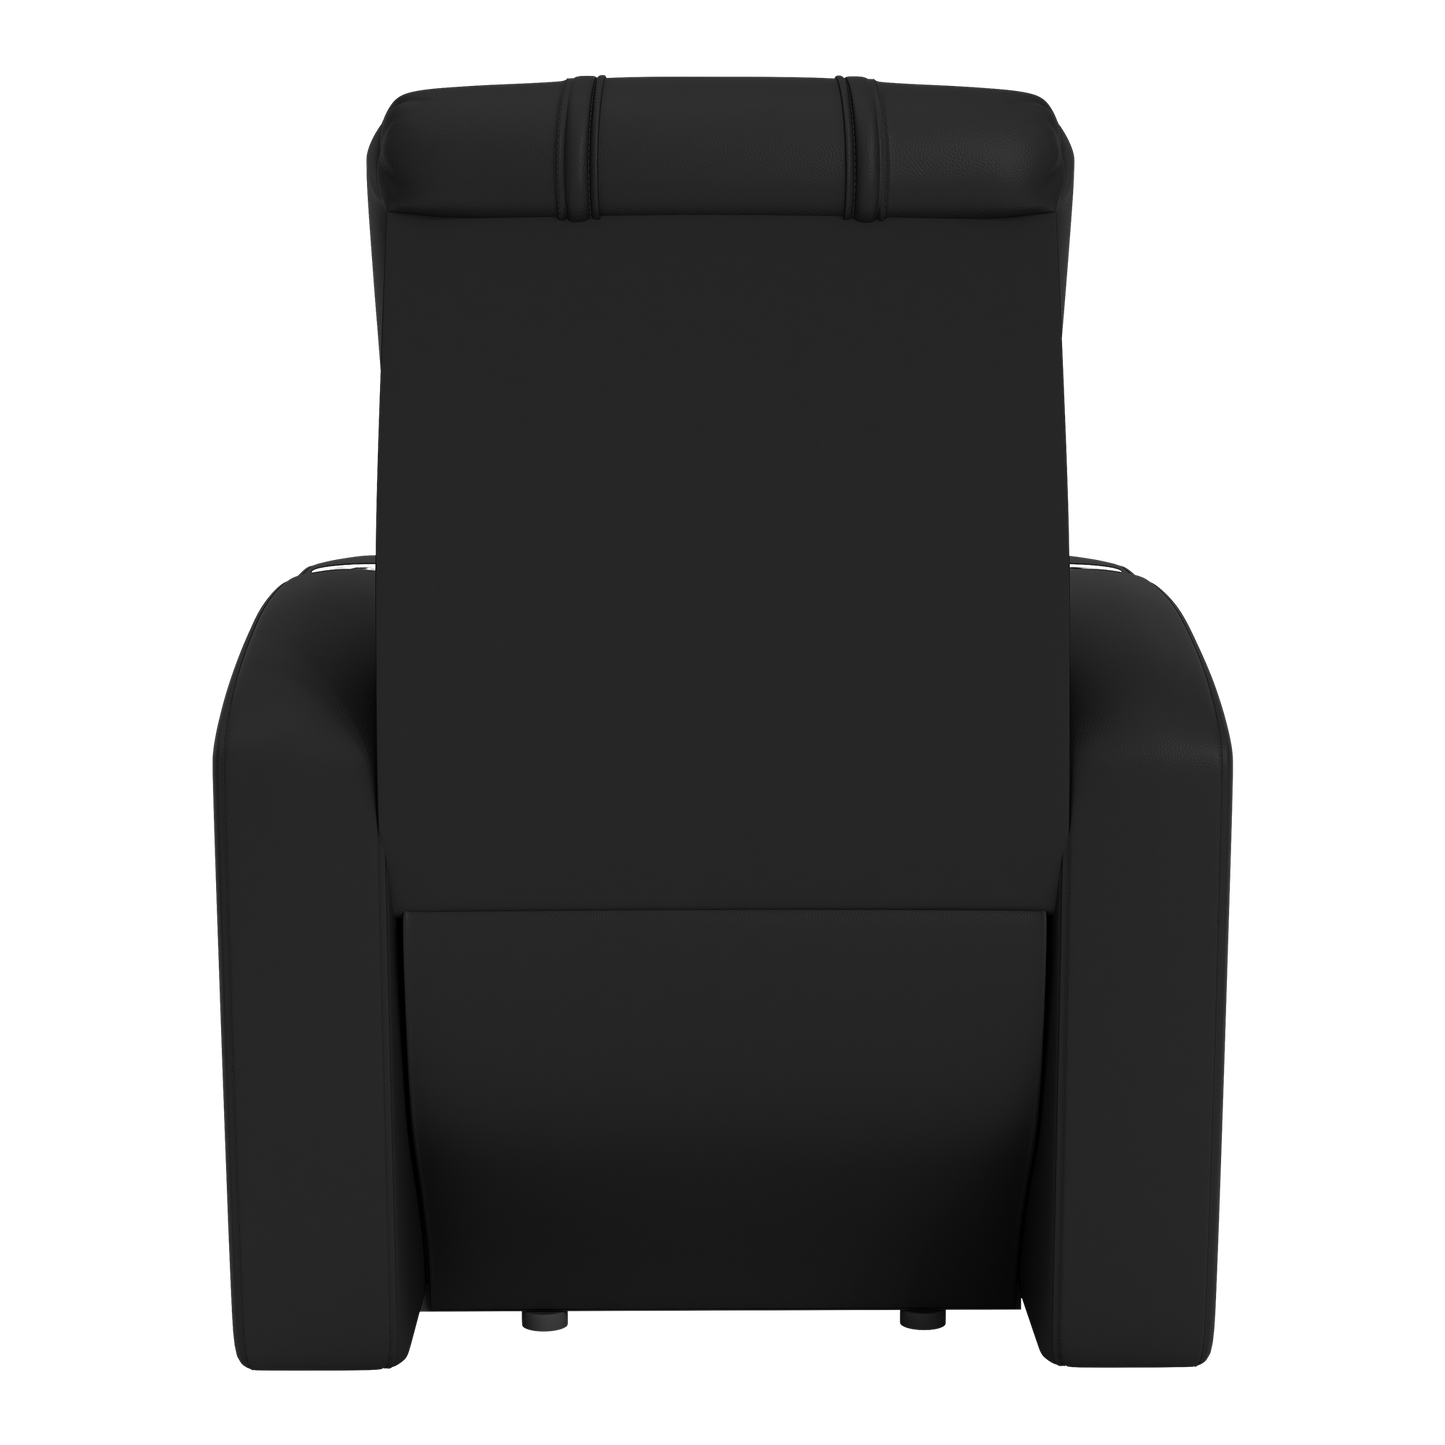 Stealth Recliner with Phoenix Suns Primary